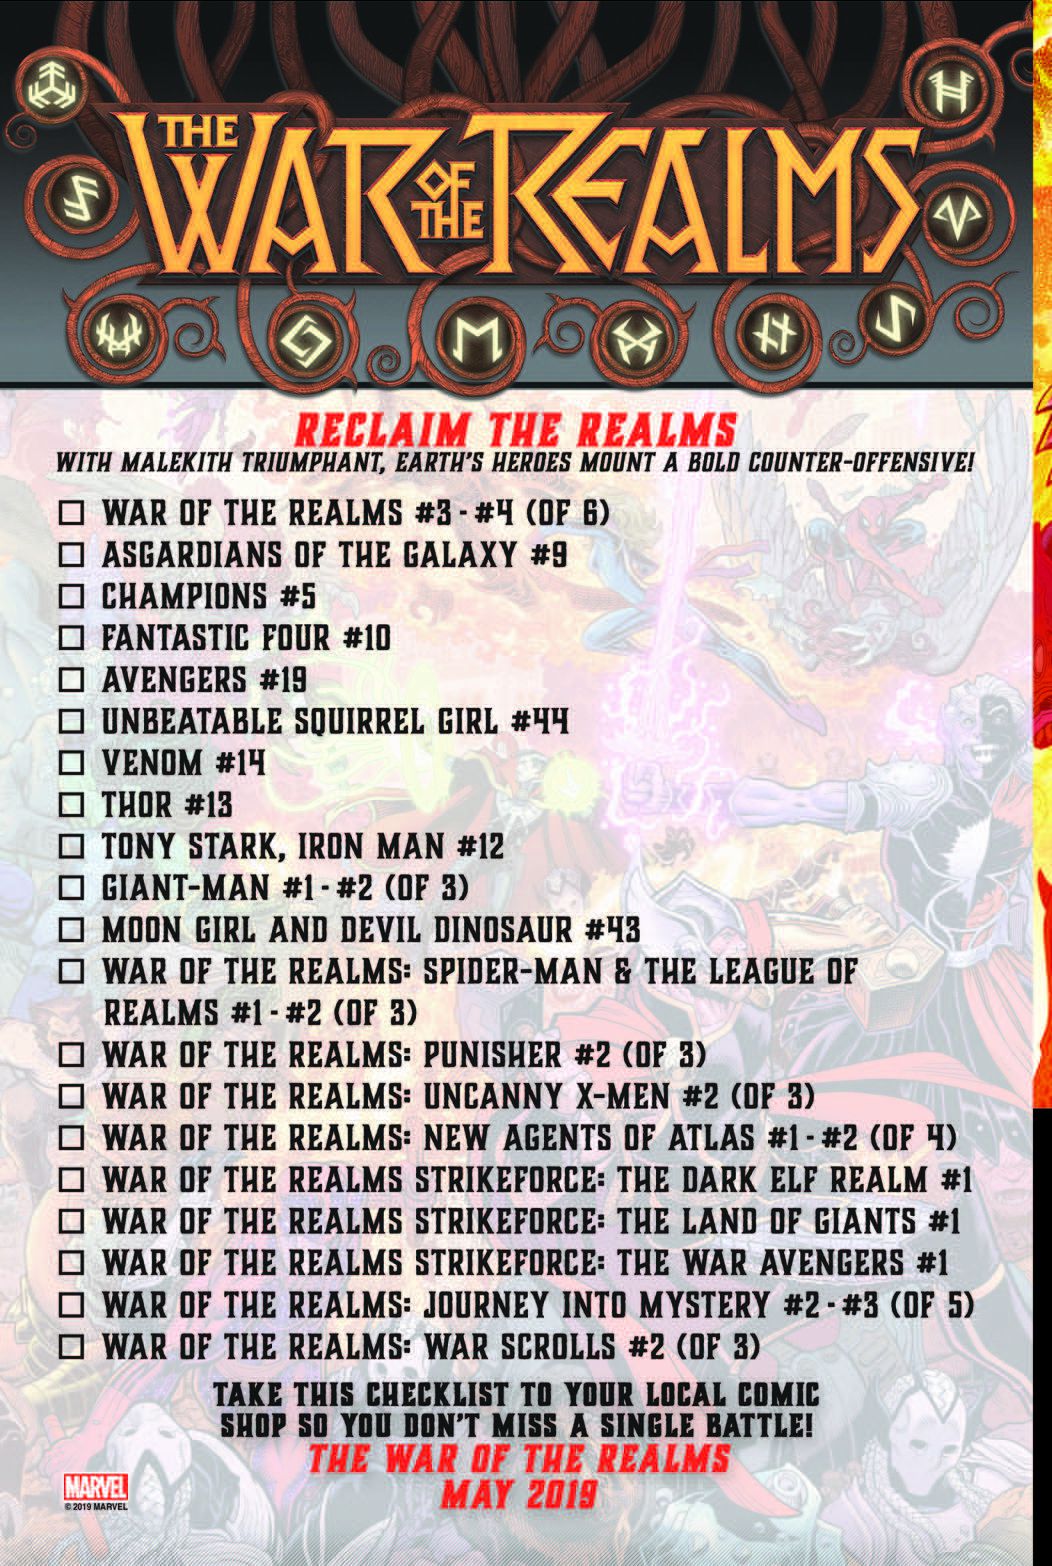 War of the Realms checklist